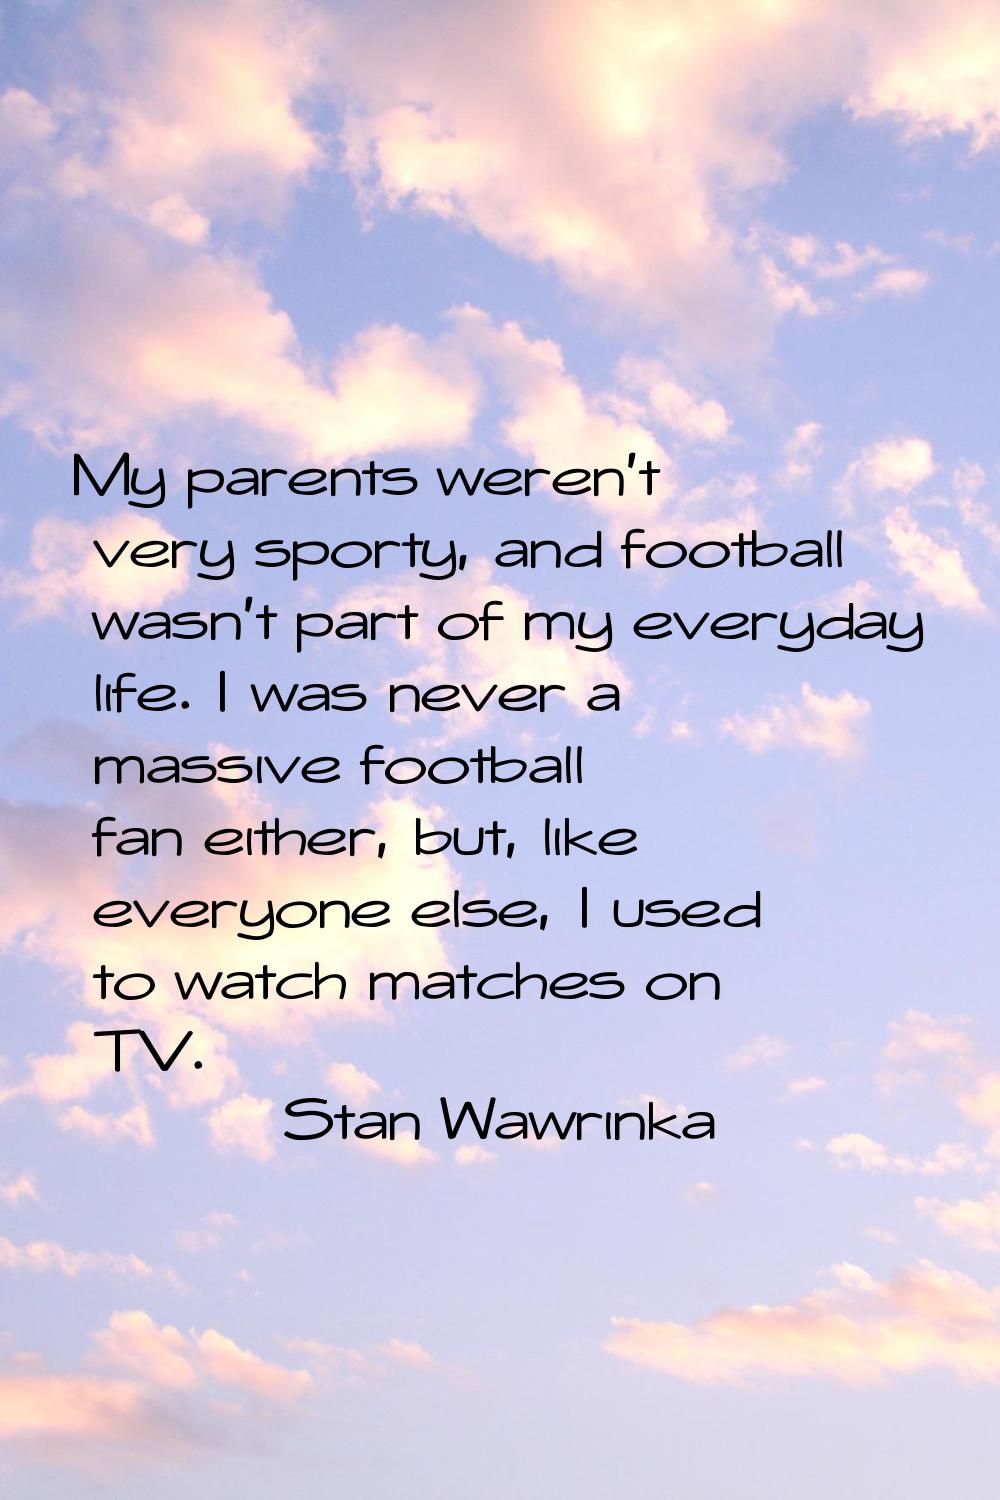 My parents weren't very sporty, and football wasn't part of my everyday life. I was never a massive